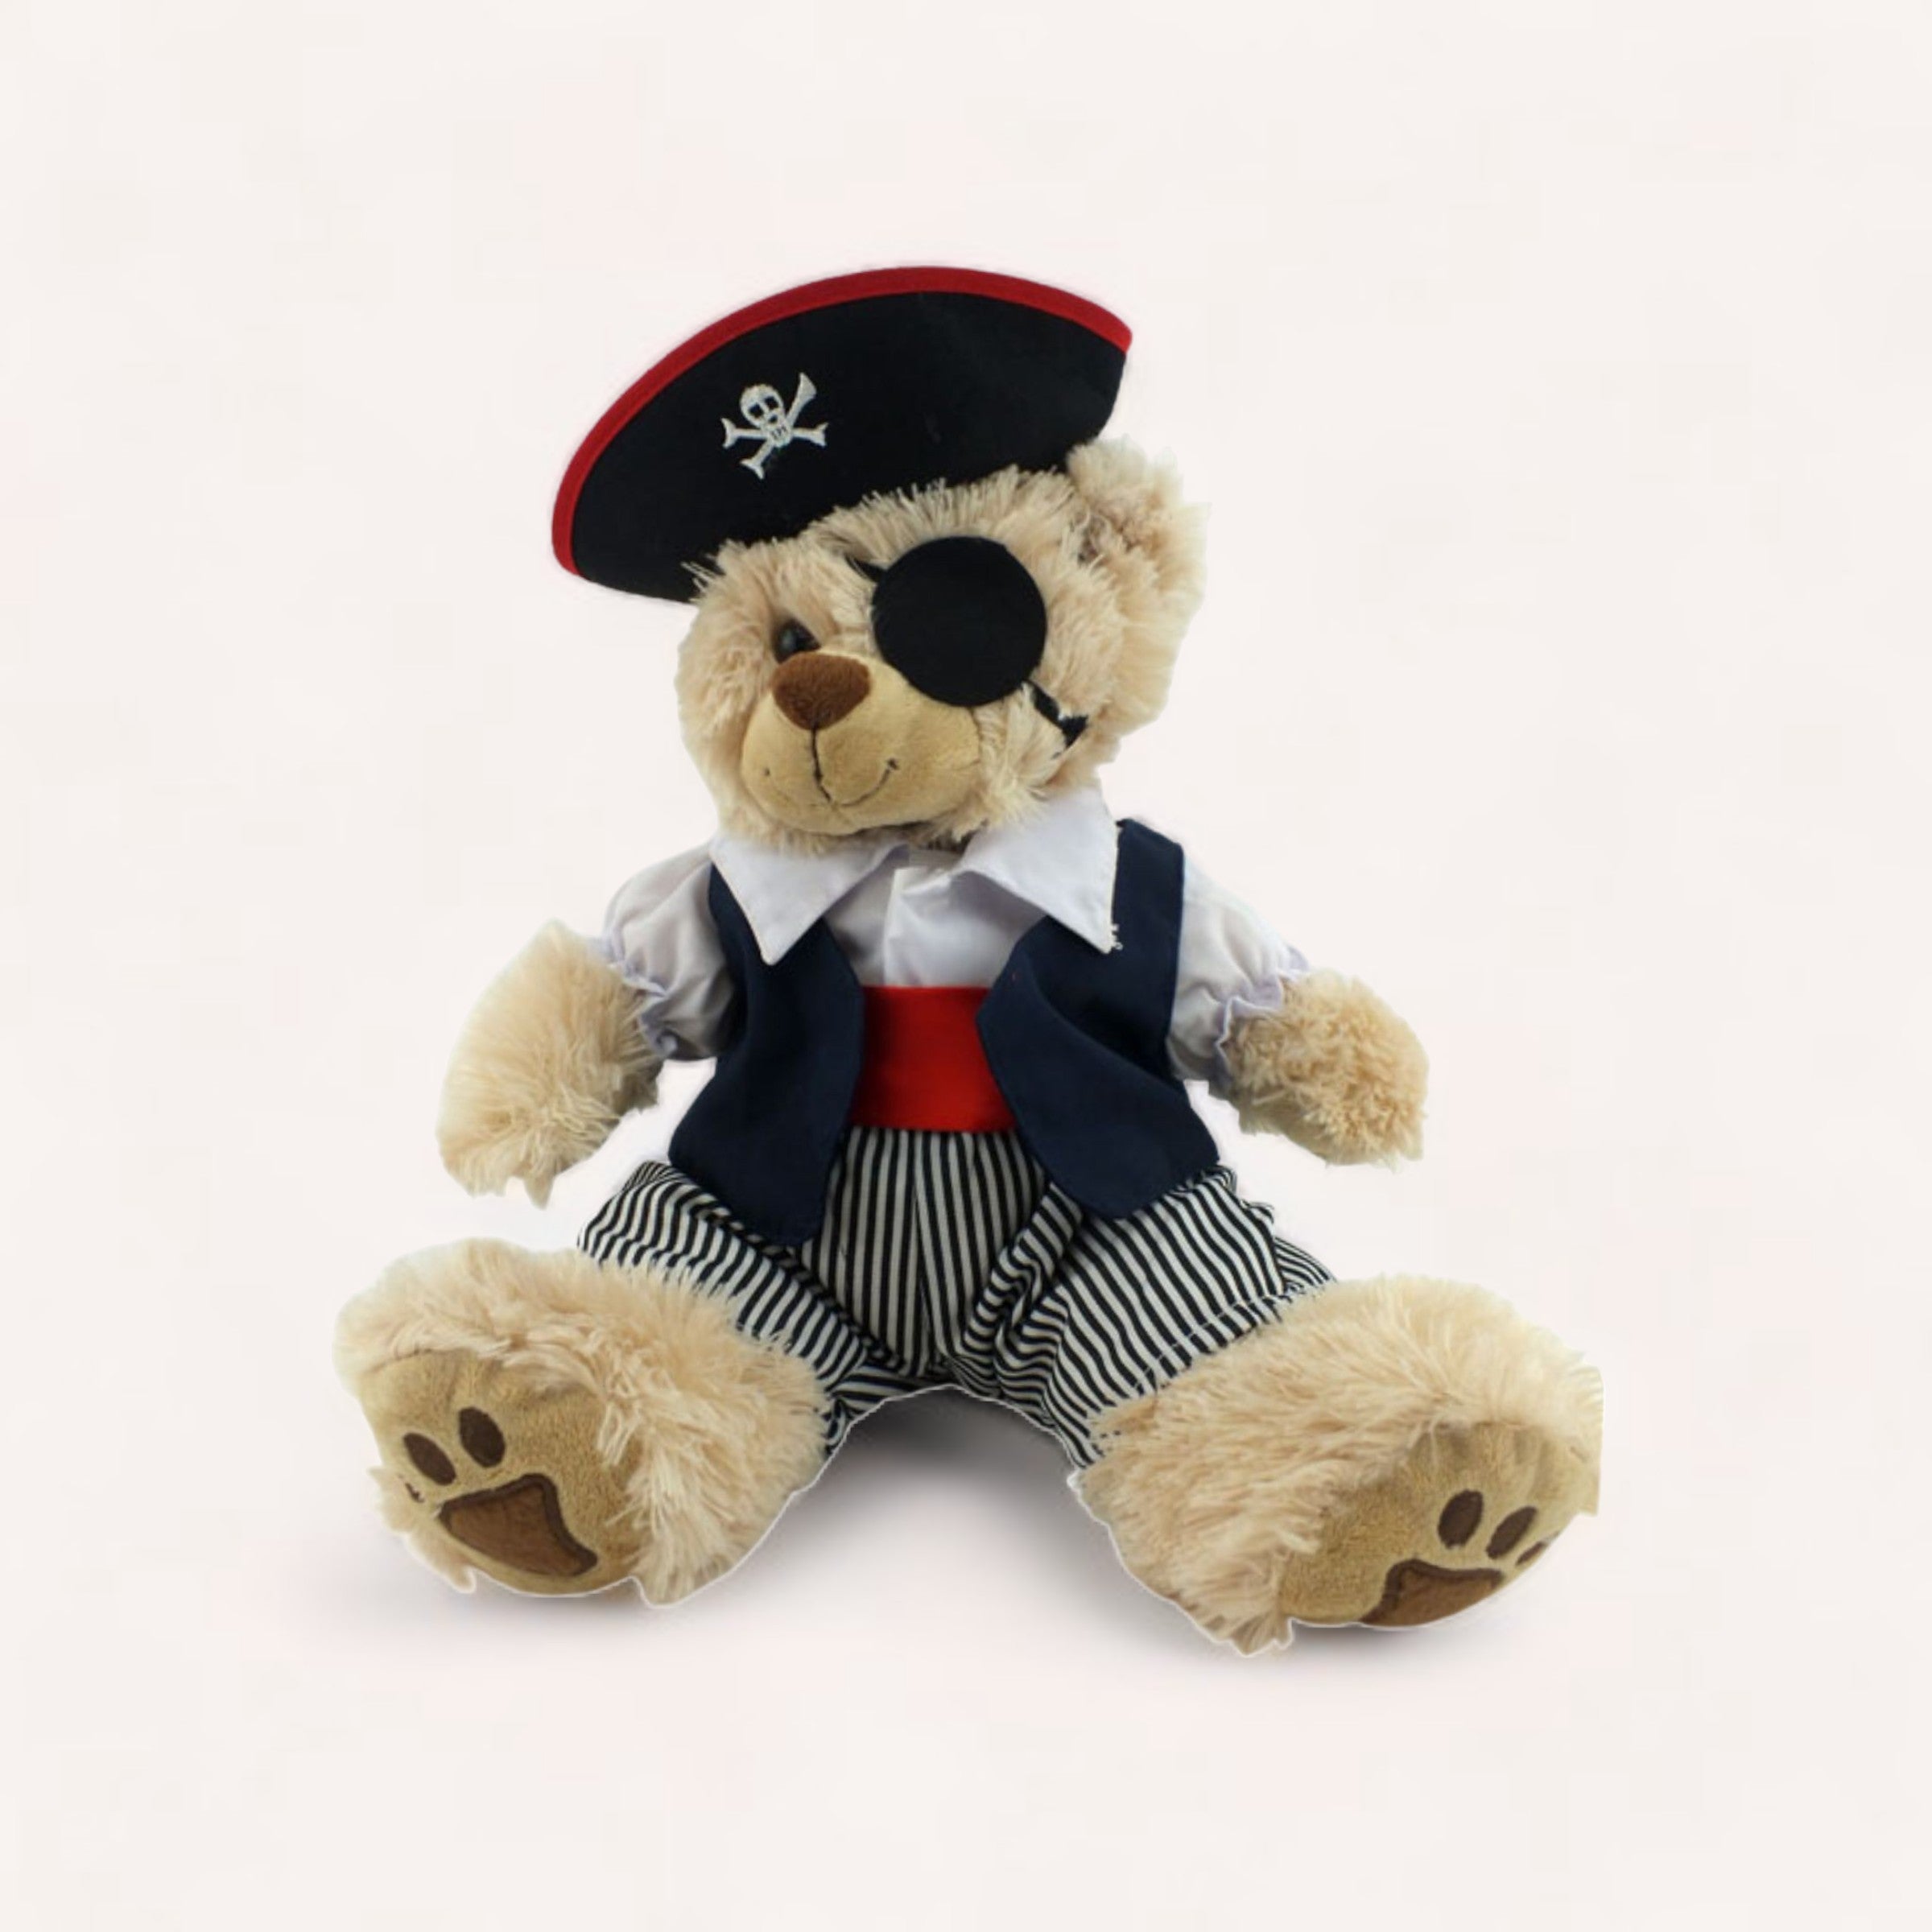 A plush teddy bear dressed in a Pirate Bear Outfit by The Teddy Factory, complete with a hat with a skull and crossbones, sitting against a white background.